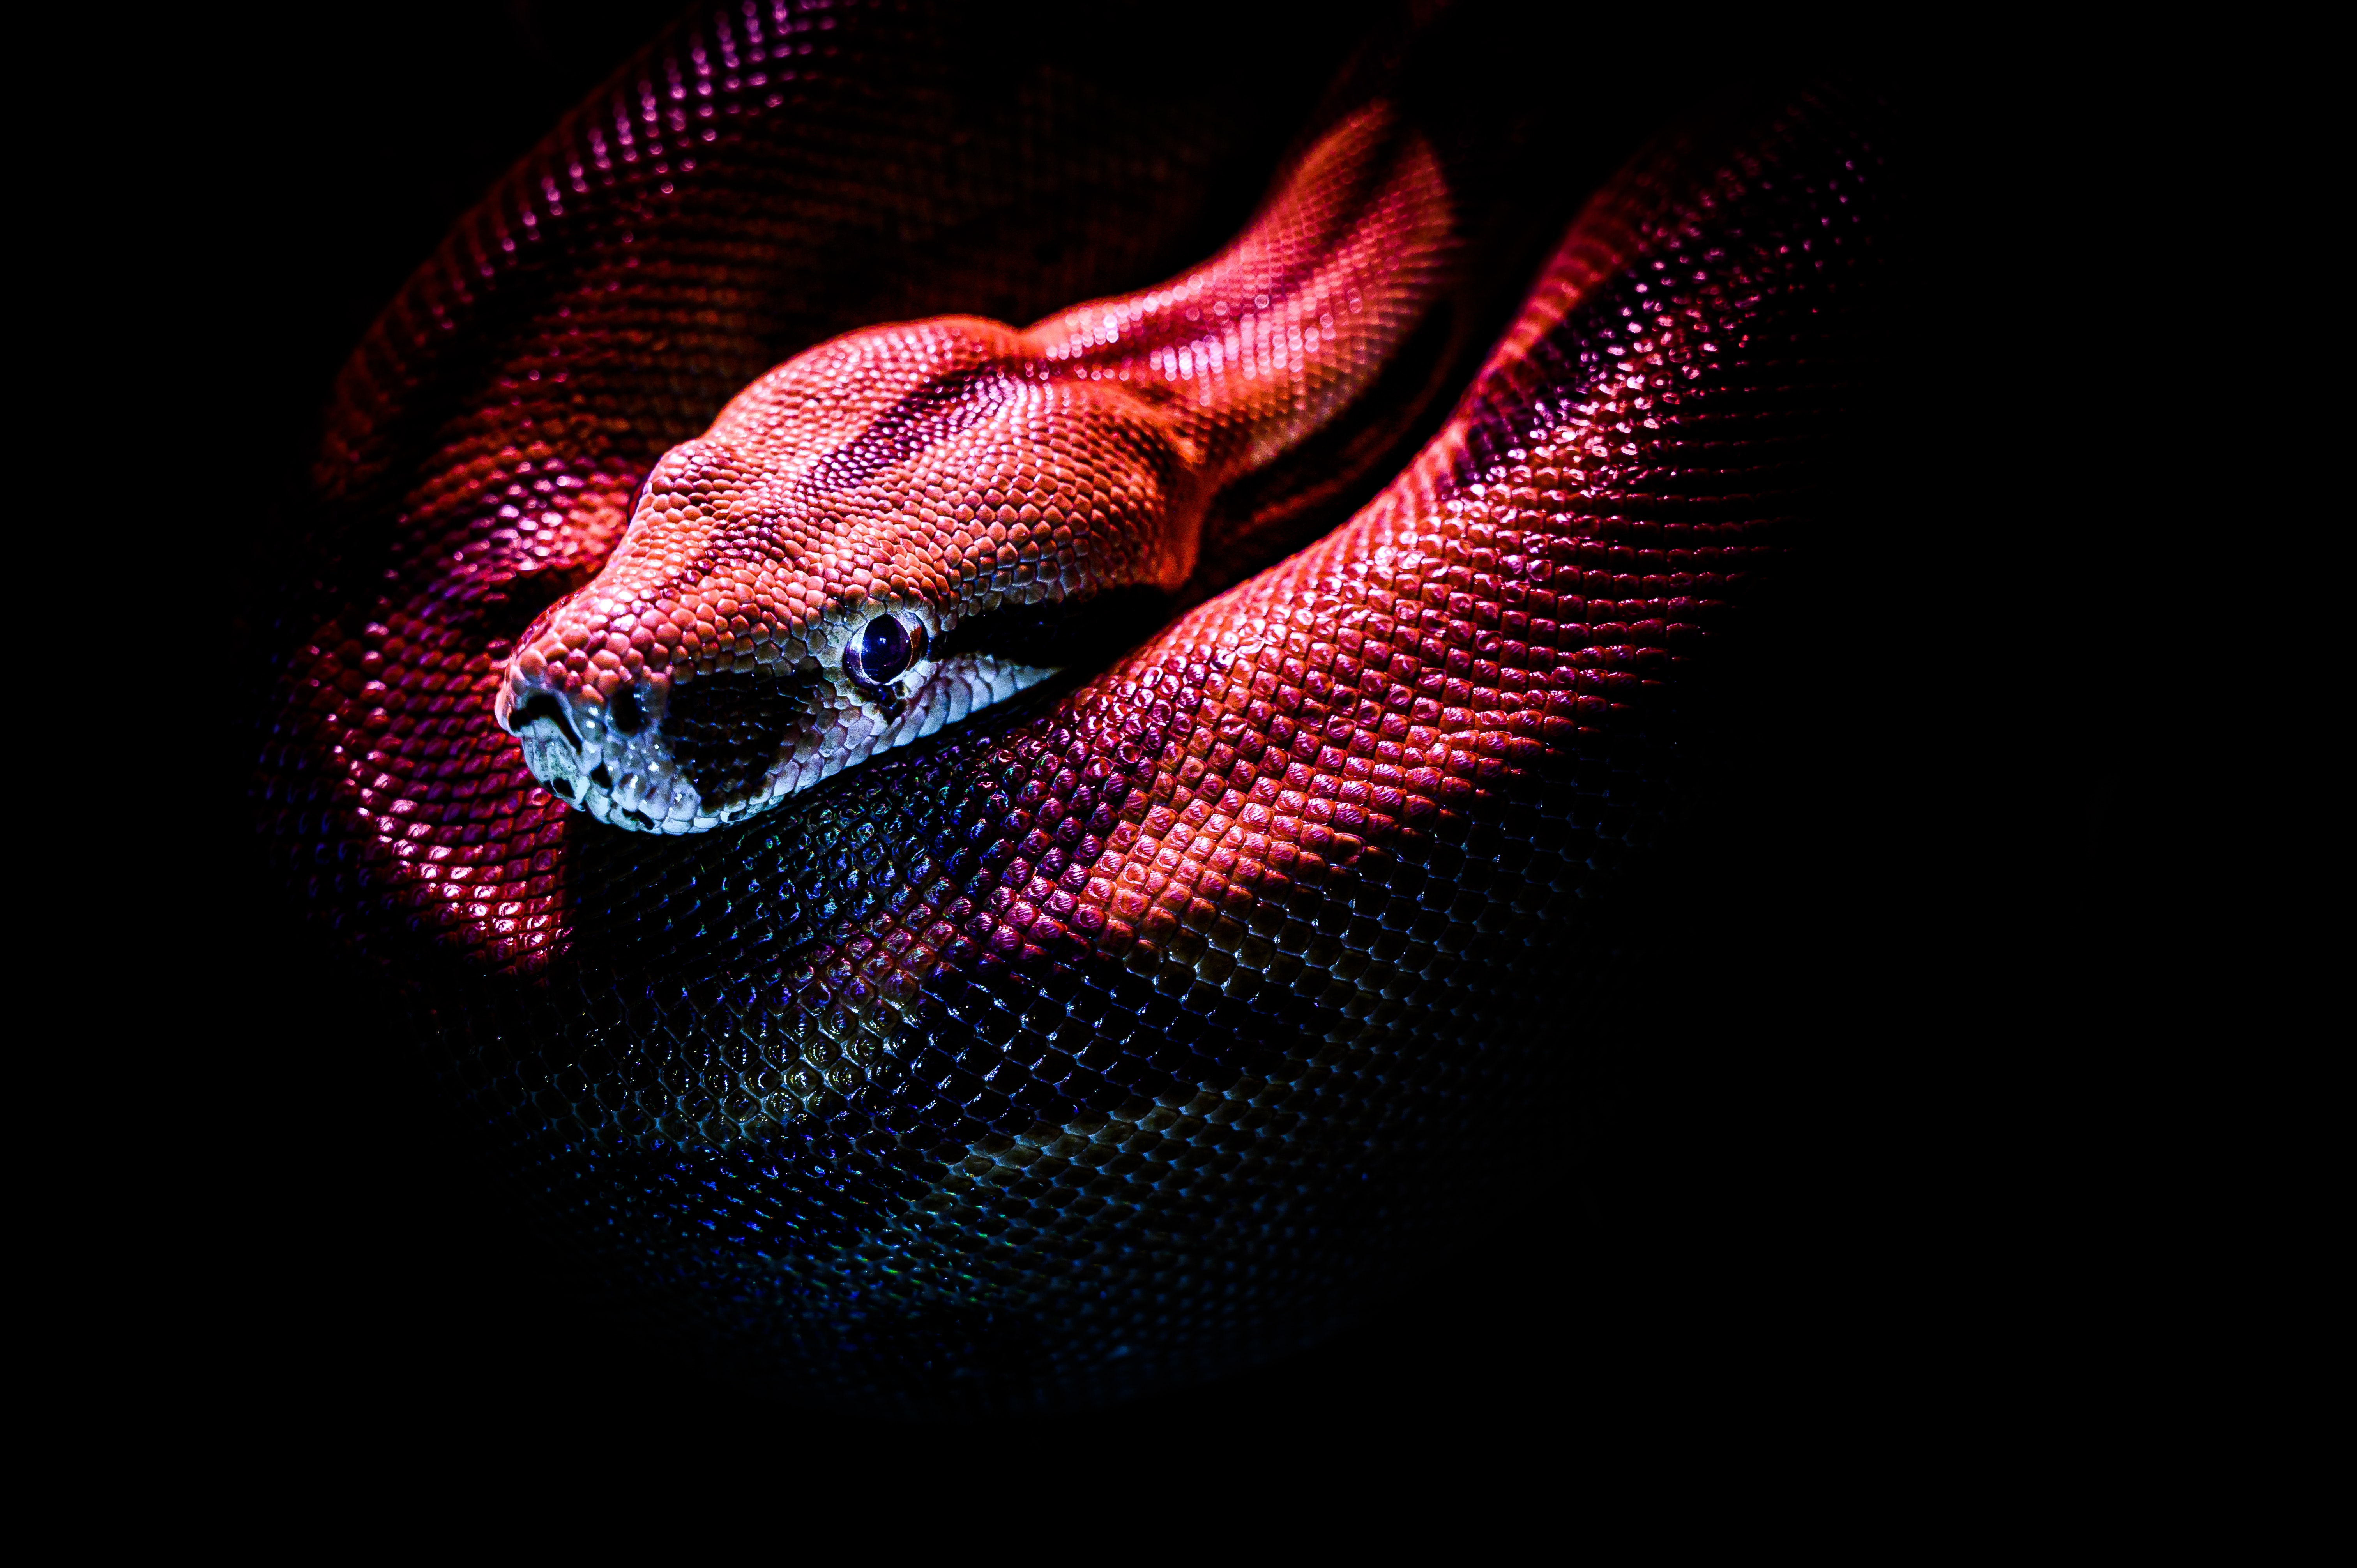 Snake photos download the best free snake stock photos hd images